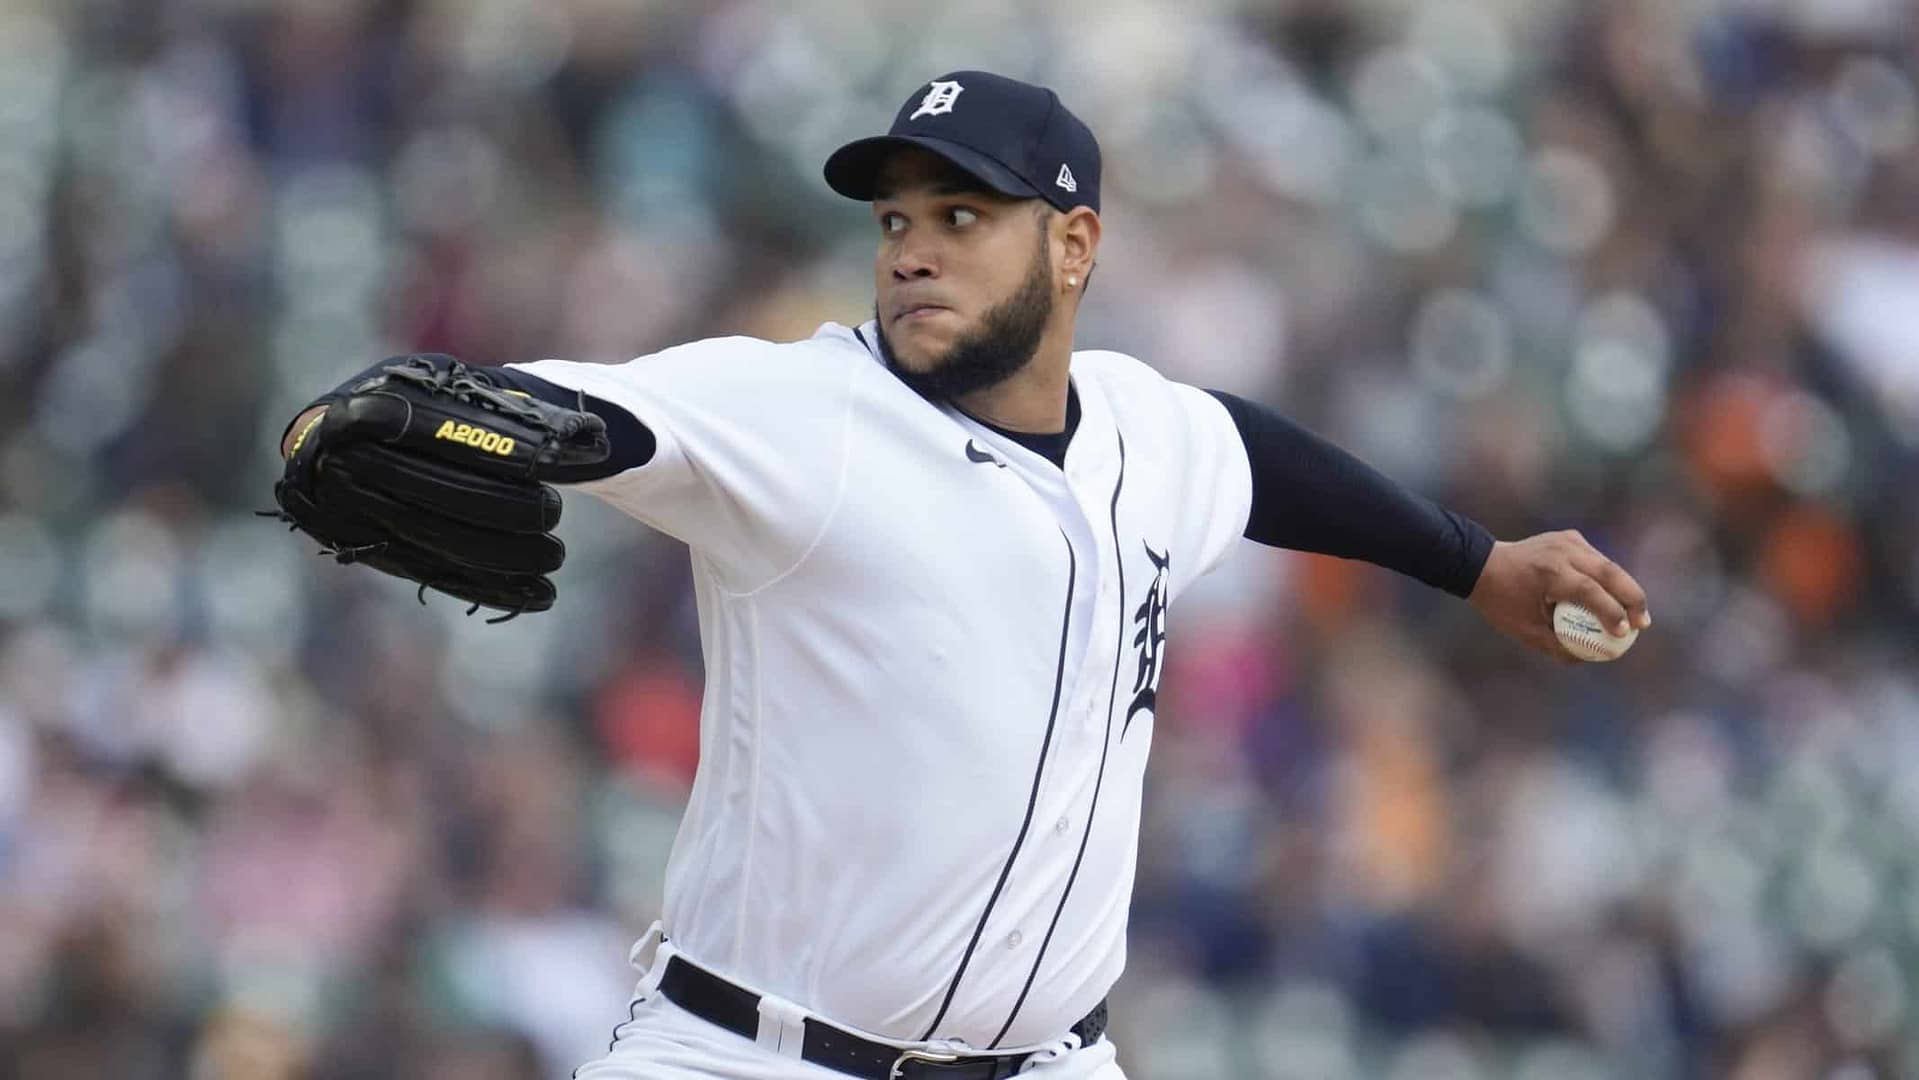 White Sox vs. Tigers: Odds, spread, over/under - May 28